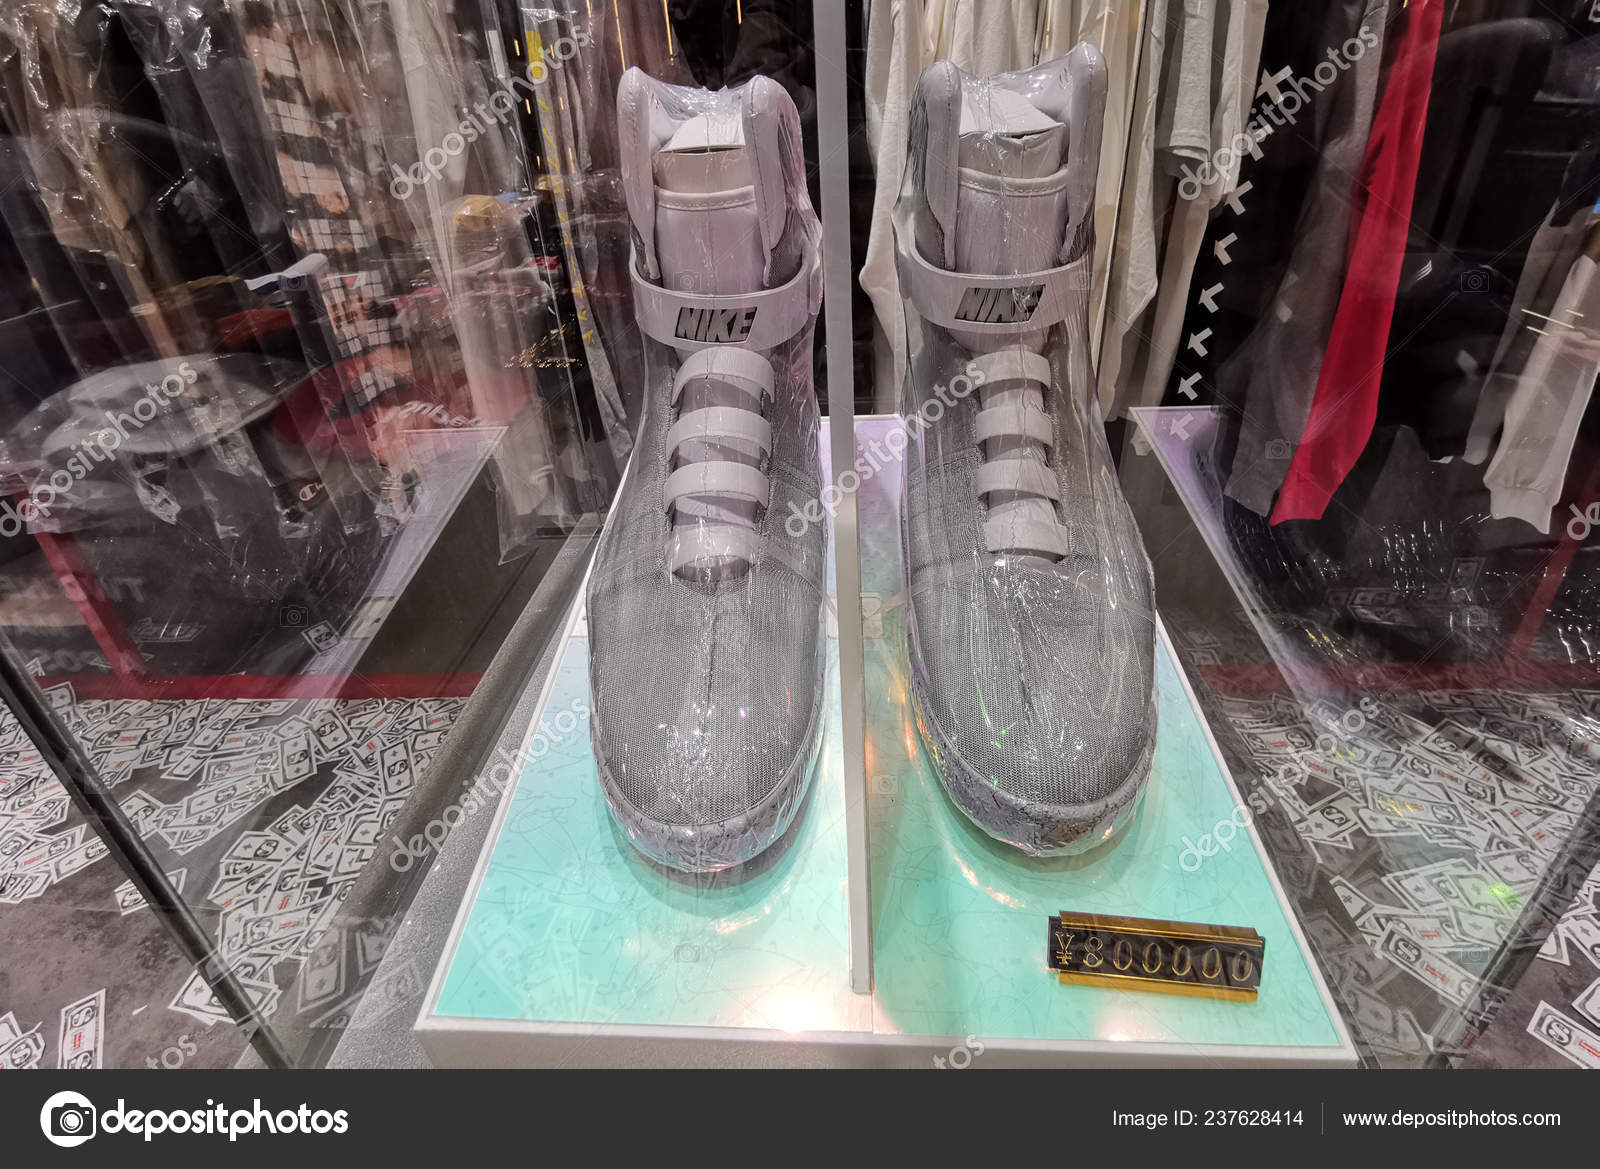 overzee Verzoekschrift rekken Pair Nike's Limited Edition Self Lacing Back Future Shoes Displayed – Stock  Editorial Photo © ChinaImages #237628414